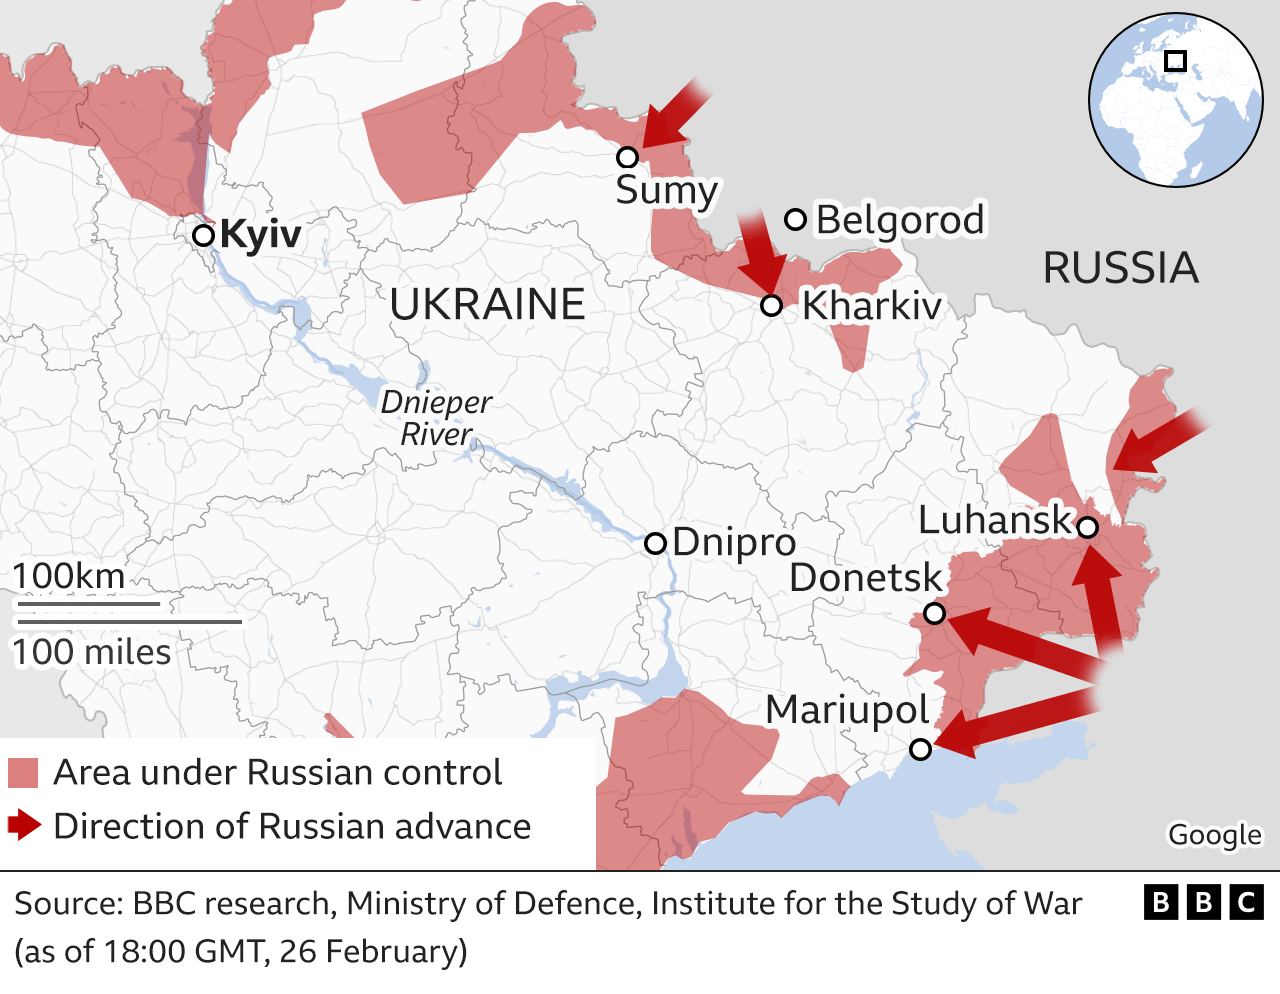 https://ichef.bbci.co.uk/news/976/cpsprodpb/183C/production/_123440260_ukraine_invasion_east_map_2x640-nc.png